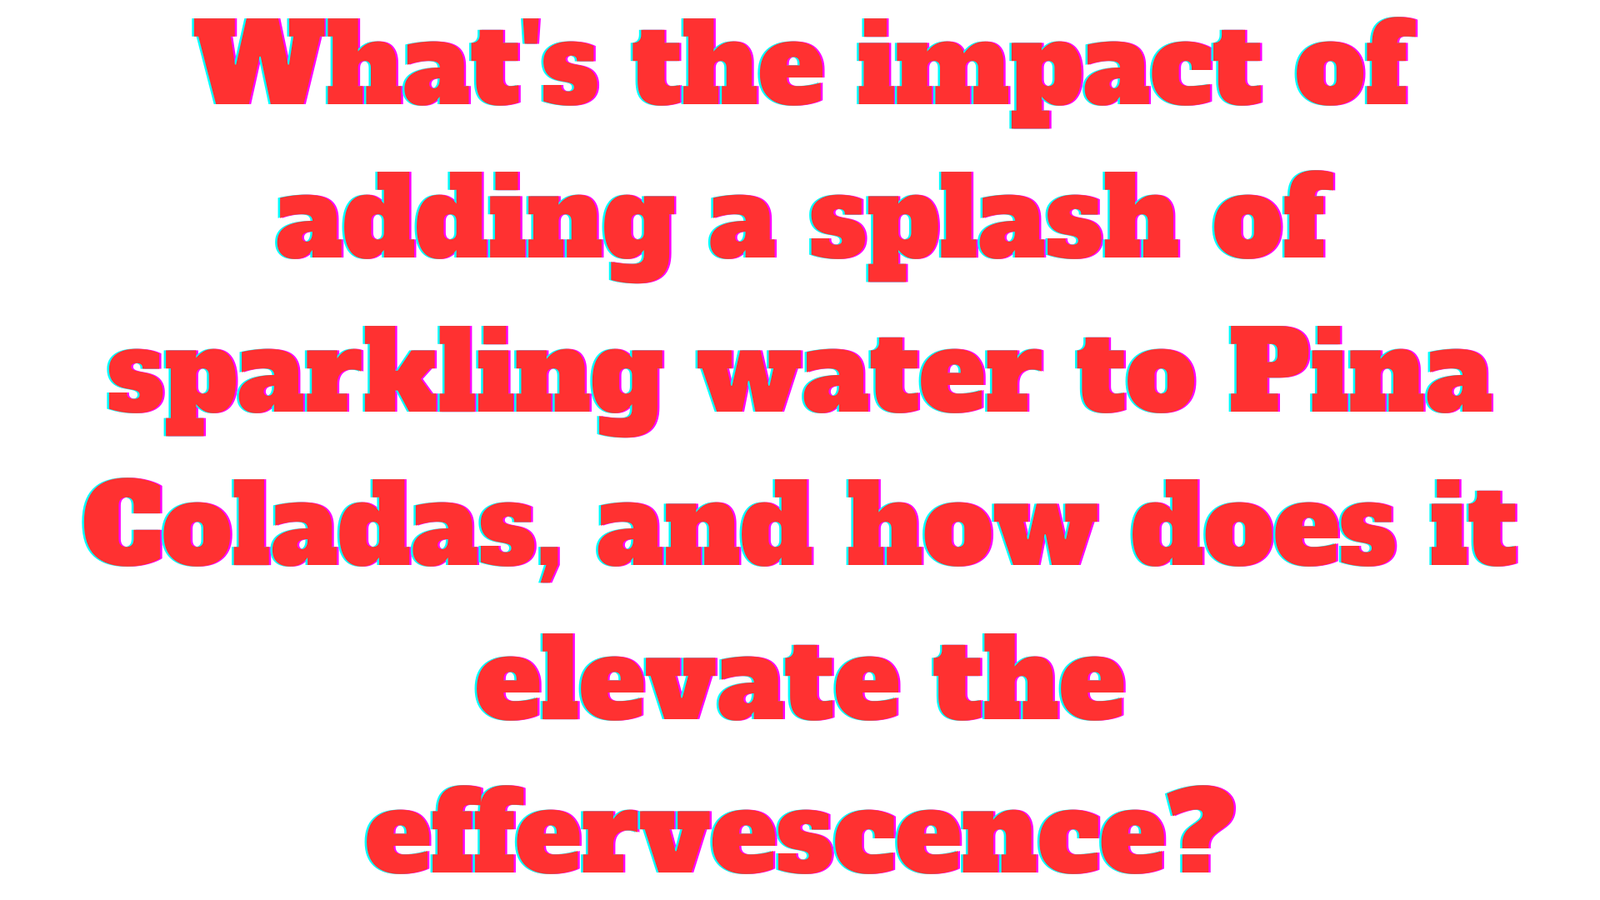 What's the impact of adding a splash of sparkling water to Pina Coladas, and how does it elevate the effervescence?